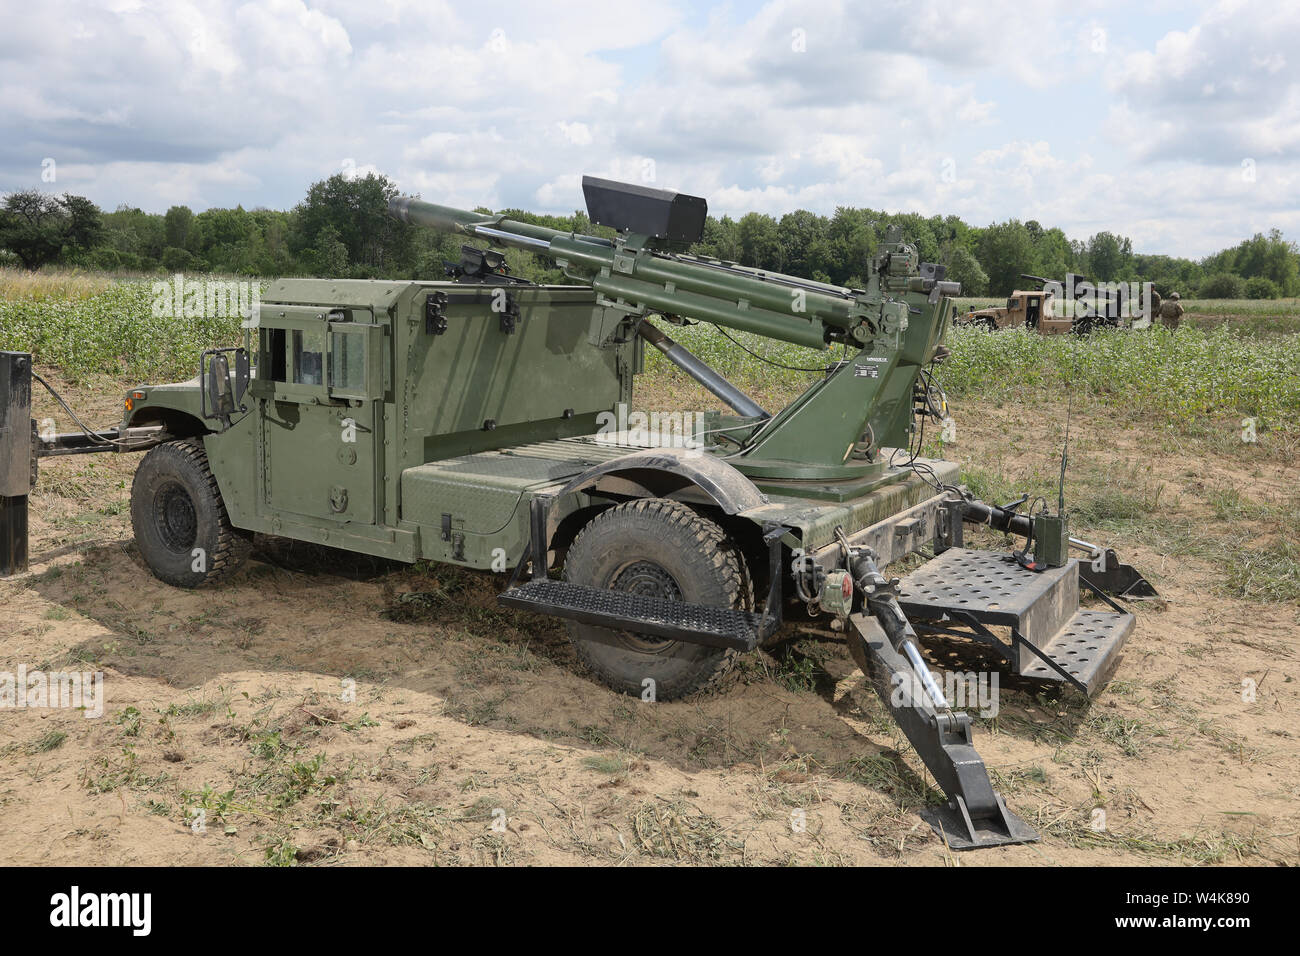 Hawkeye 105mm Mobile Weapon System while crew rest from conducting drills 23 July, 2019 assigned to a test Platoon of 2nd Battalion, 122 Field Artillery, Illinois Army National Guard. The Hawkeye is an experimental weapon issued to 2-122 FA to test at Exercise Northern Strike 19.  The exercise unites approximately 5,000 service members from nearly every branch of service representing more than 20 states and seven coalition countries to conduct combined ground and air exercises. Northern Strike is one of the largest reserve component exercises supported by the U.S. Department of Defense. Its mi Stock Photo